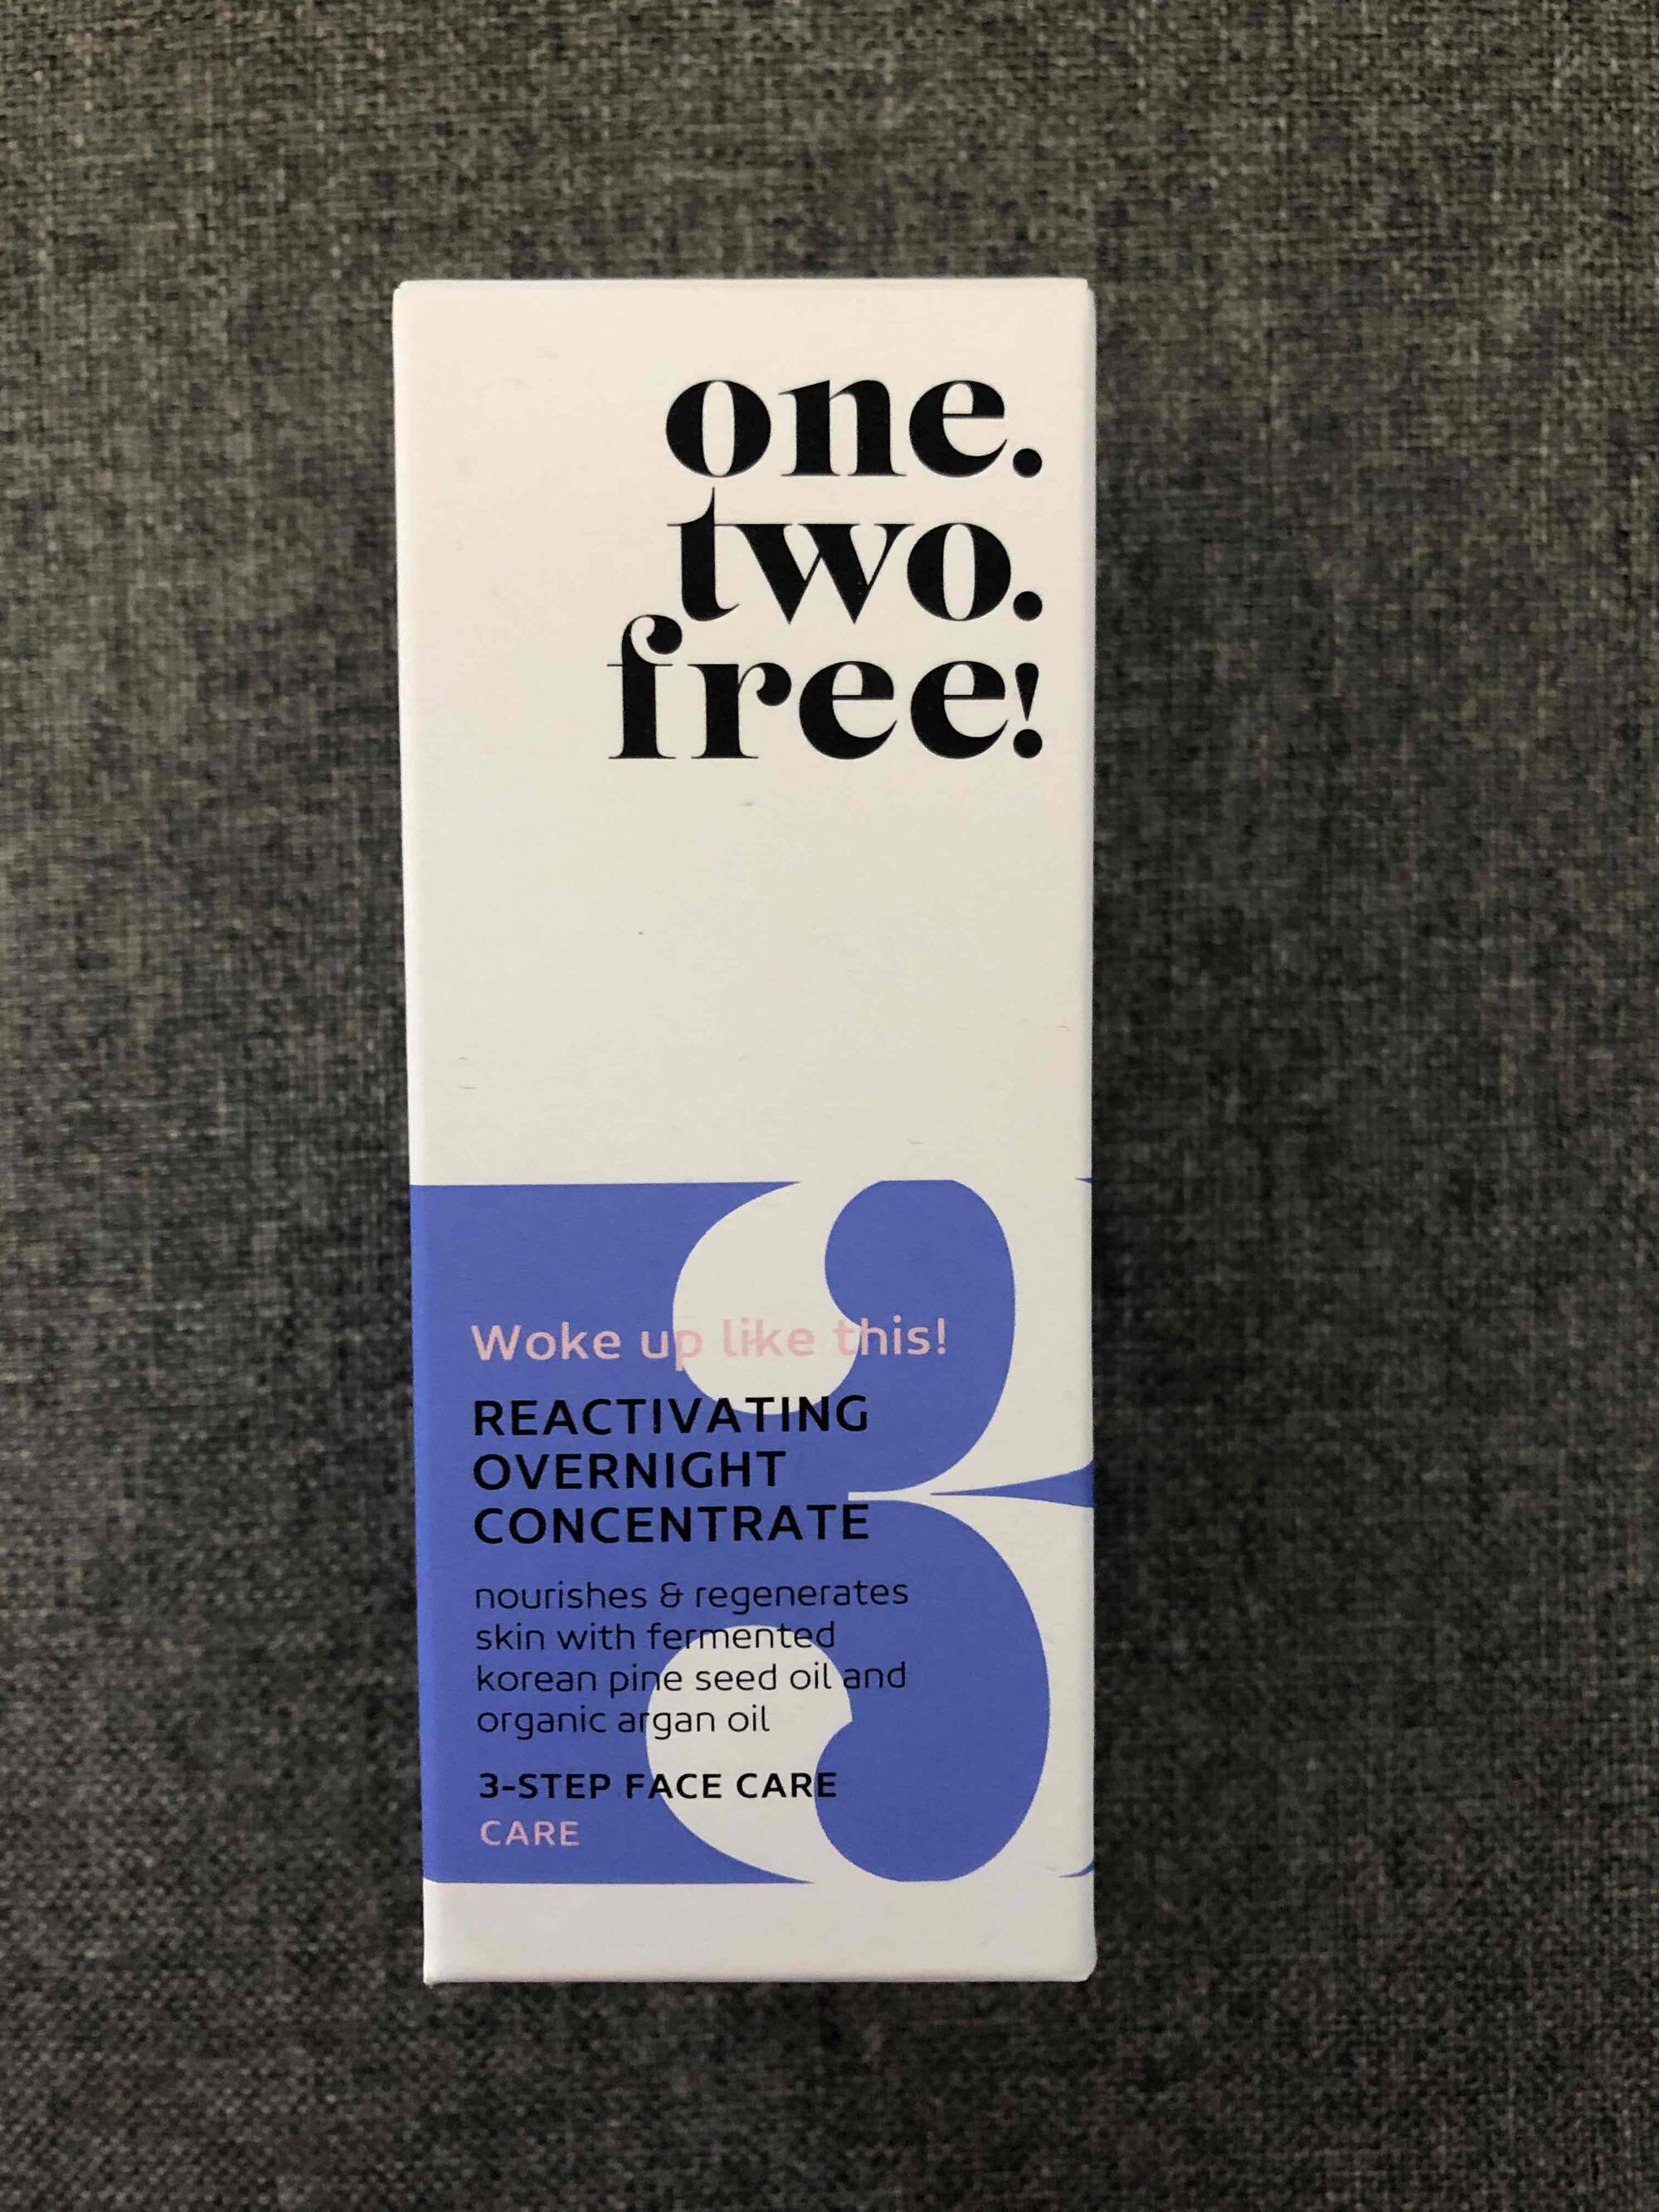 ONE.TWO.FREE! - Reactivating overnight concentrate